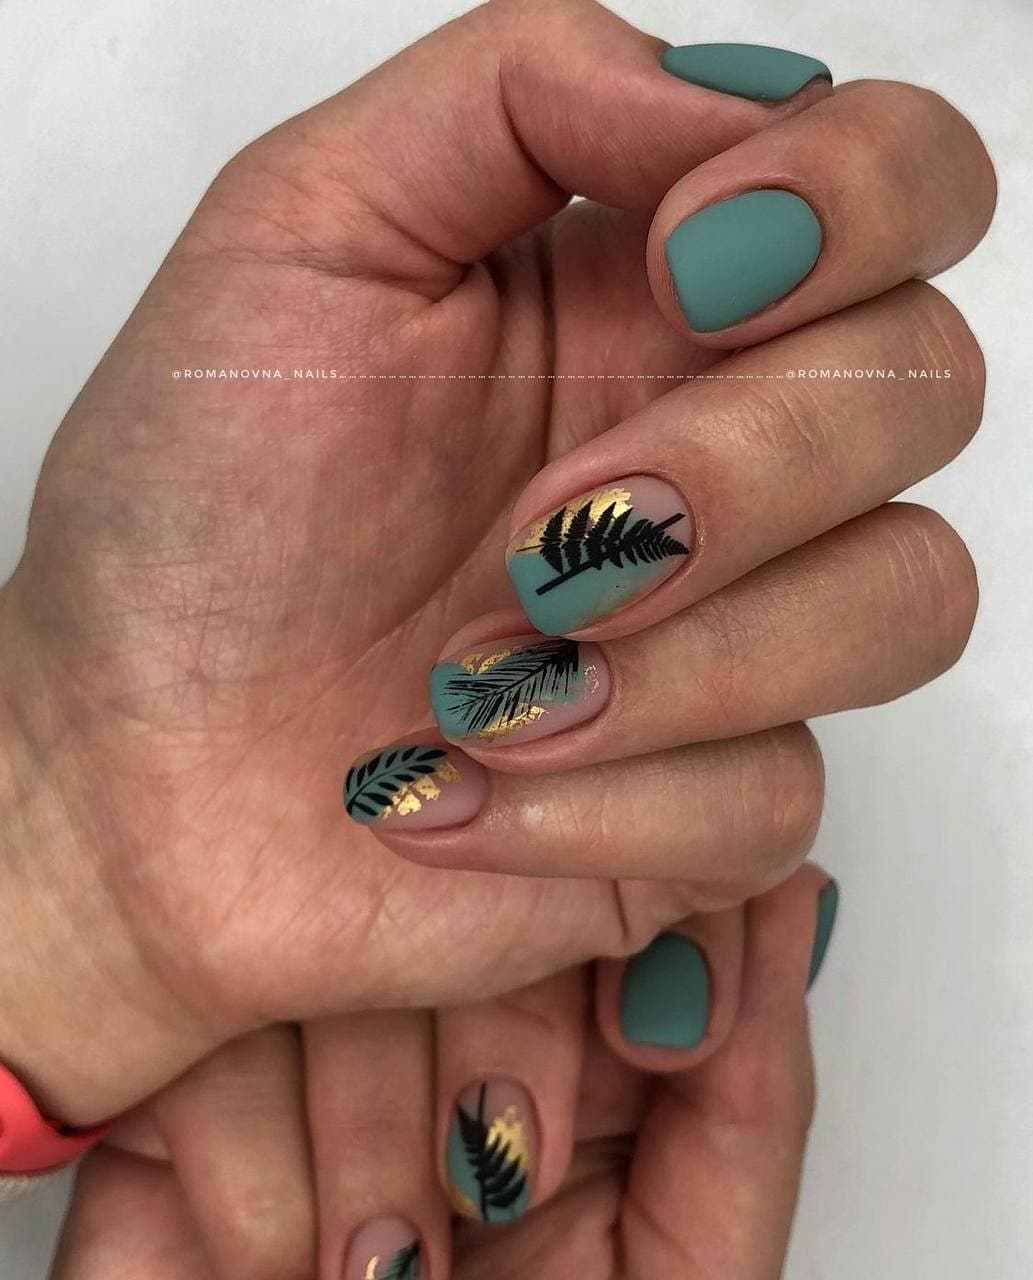 20 Cute Fall Nail Designs To Try In 2021 images 5